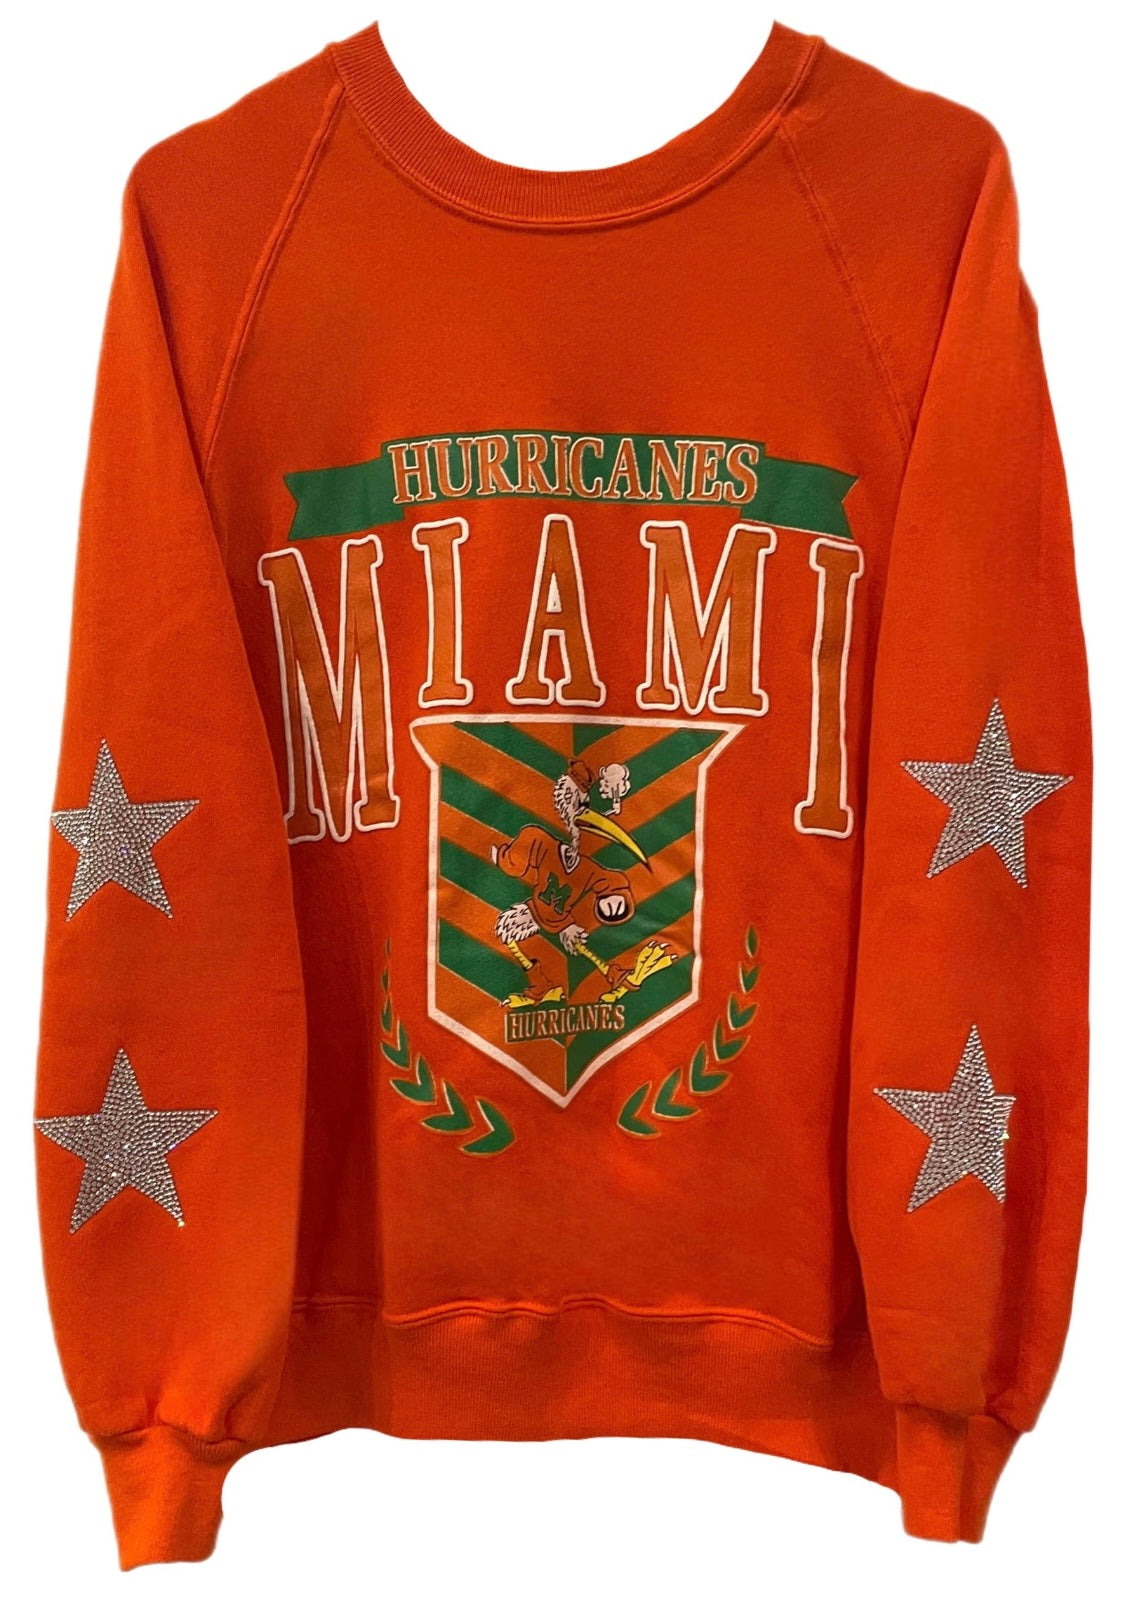 ShopCrystalRags University of Miami, One of A Kind Vintage Miami Hurricanes Sweatshirt with Three Crystal Star Design